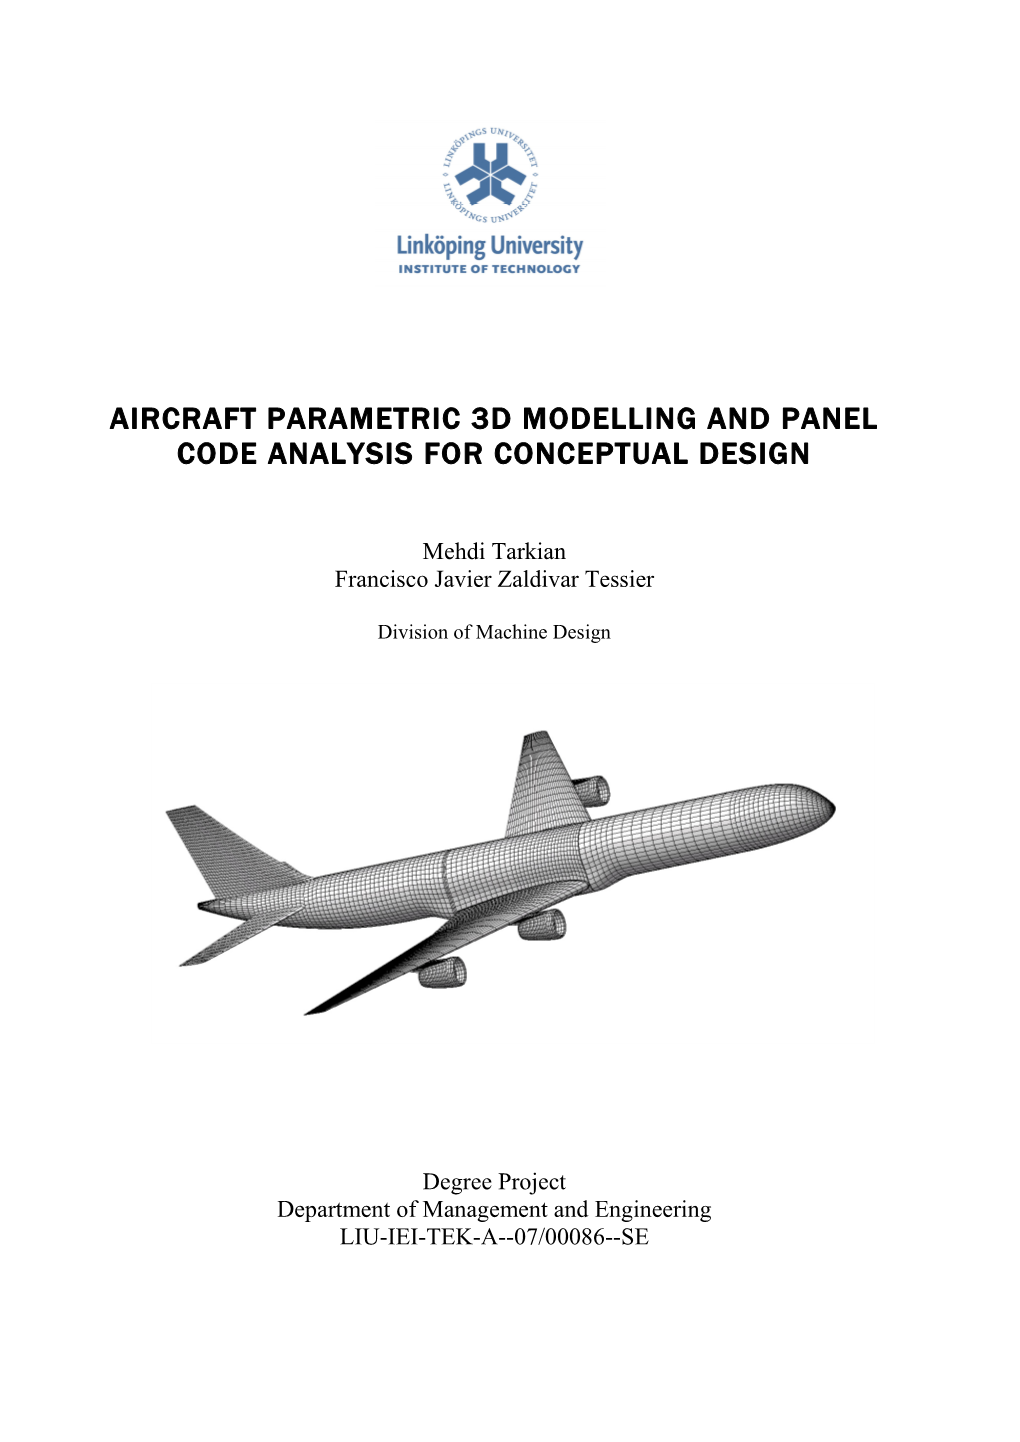 Aircraft Parametric 3D Modelling and Panel Code Analysis for Conceptual Design